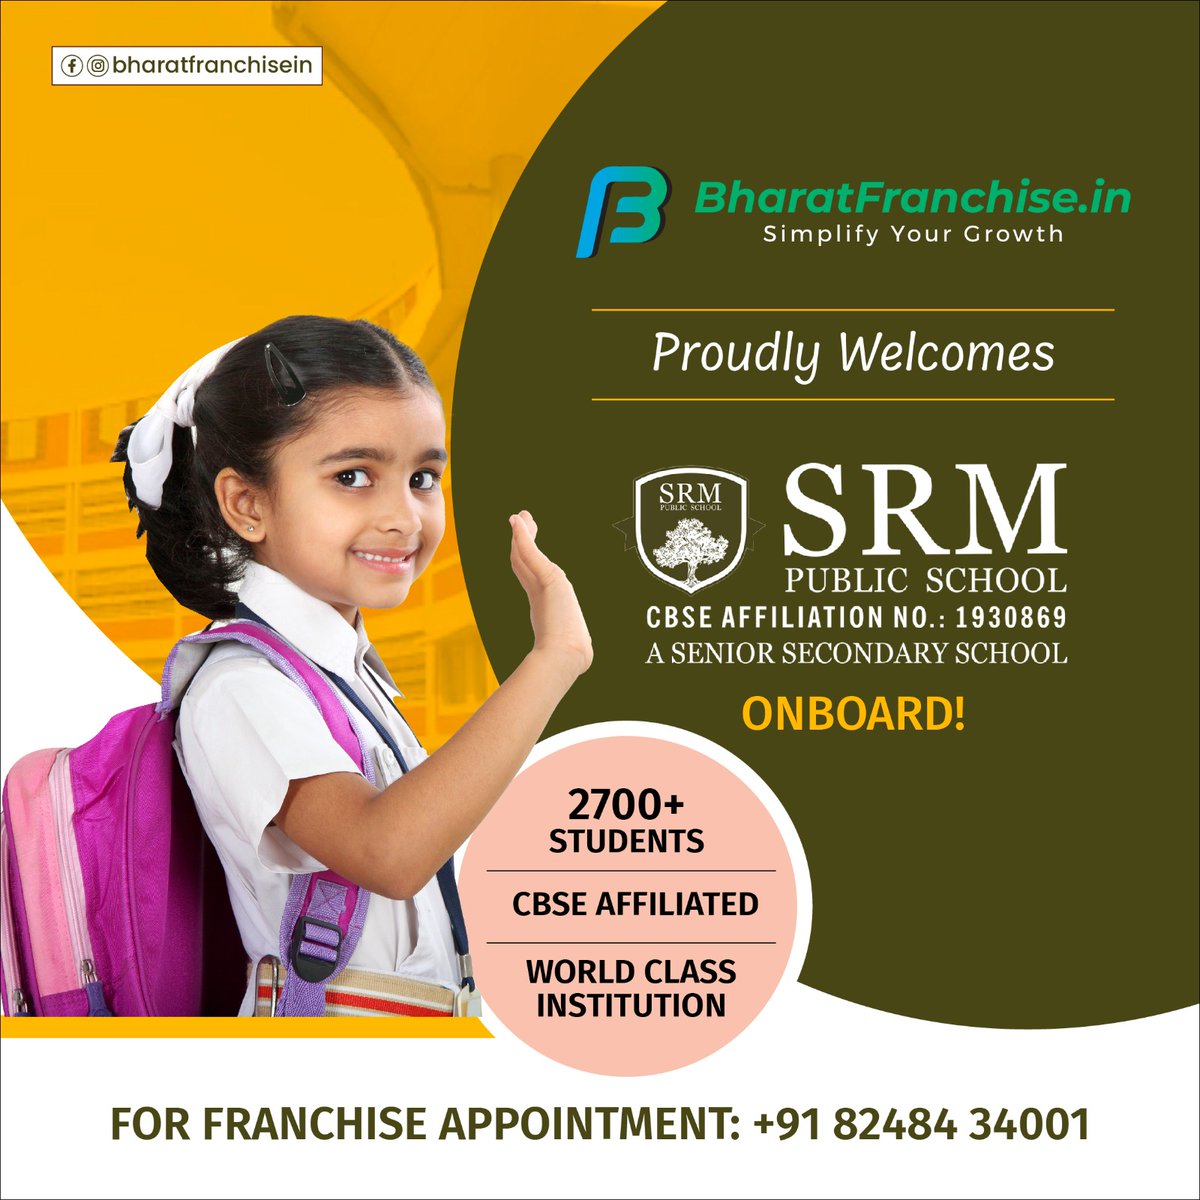 We're delighted to announce that Bharat Franchise has partnered with SRM Public School! With 2700+ students and CBSE affiliation, SRM Public School is committed to providing a world-class education. Join us in welcoming them aboard!

#BharatFranchise #SRMPublicSchool #CBSE